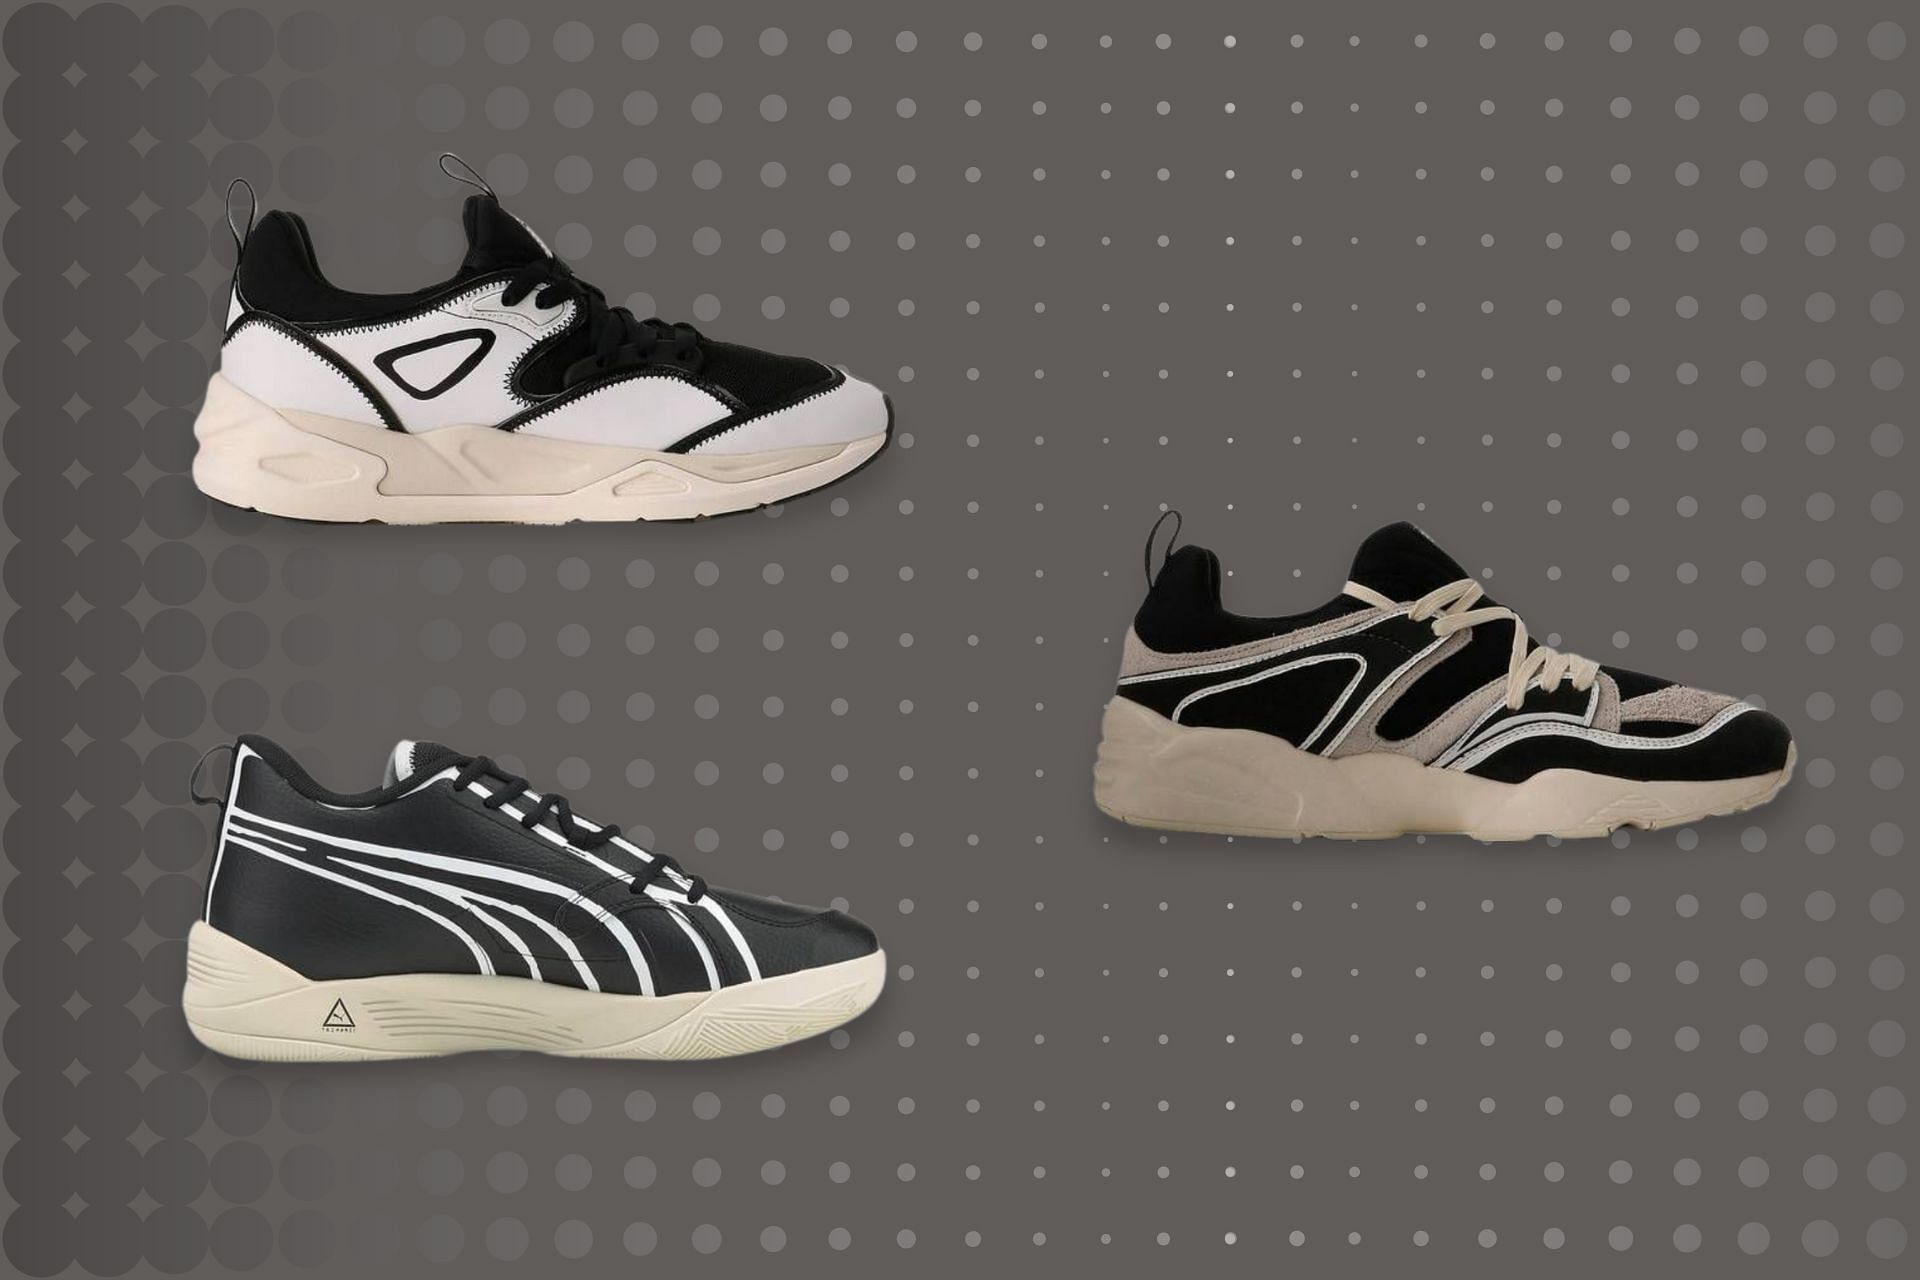 Take a detailed look at the newly launched sneakers (Image via Sportskeeda)